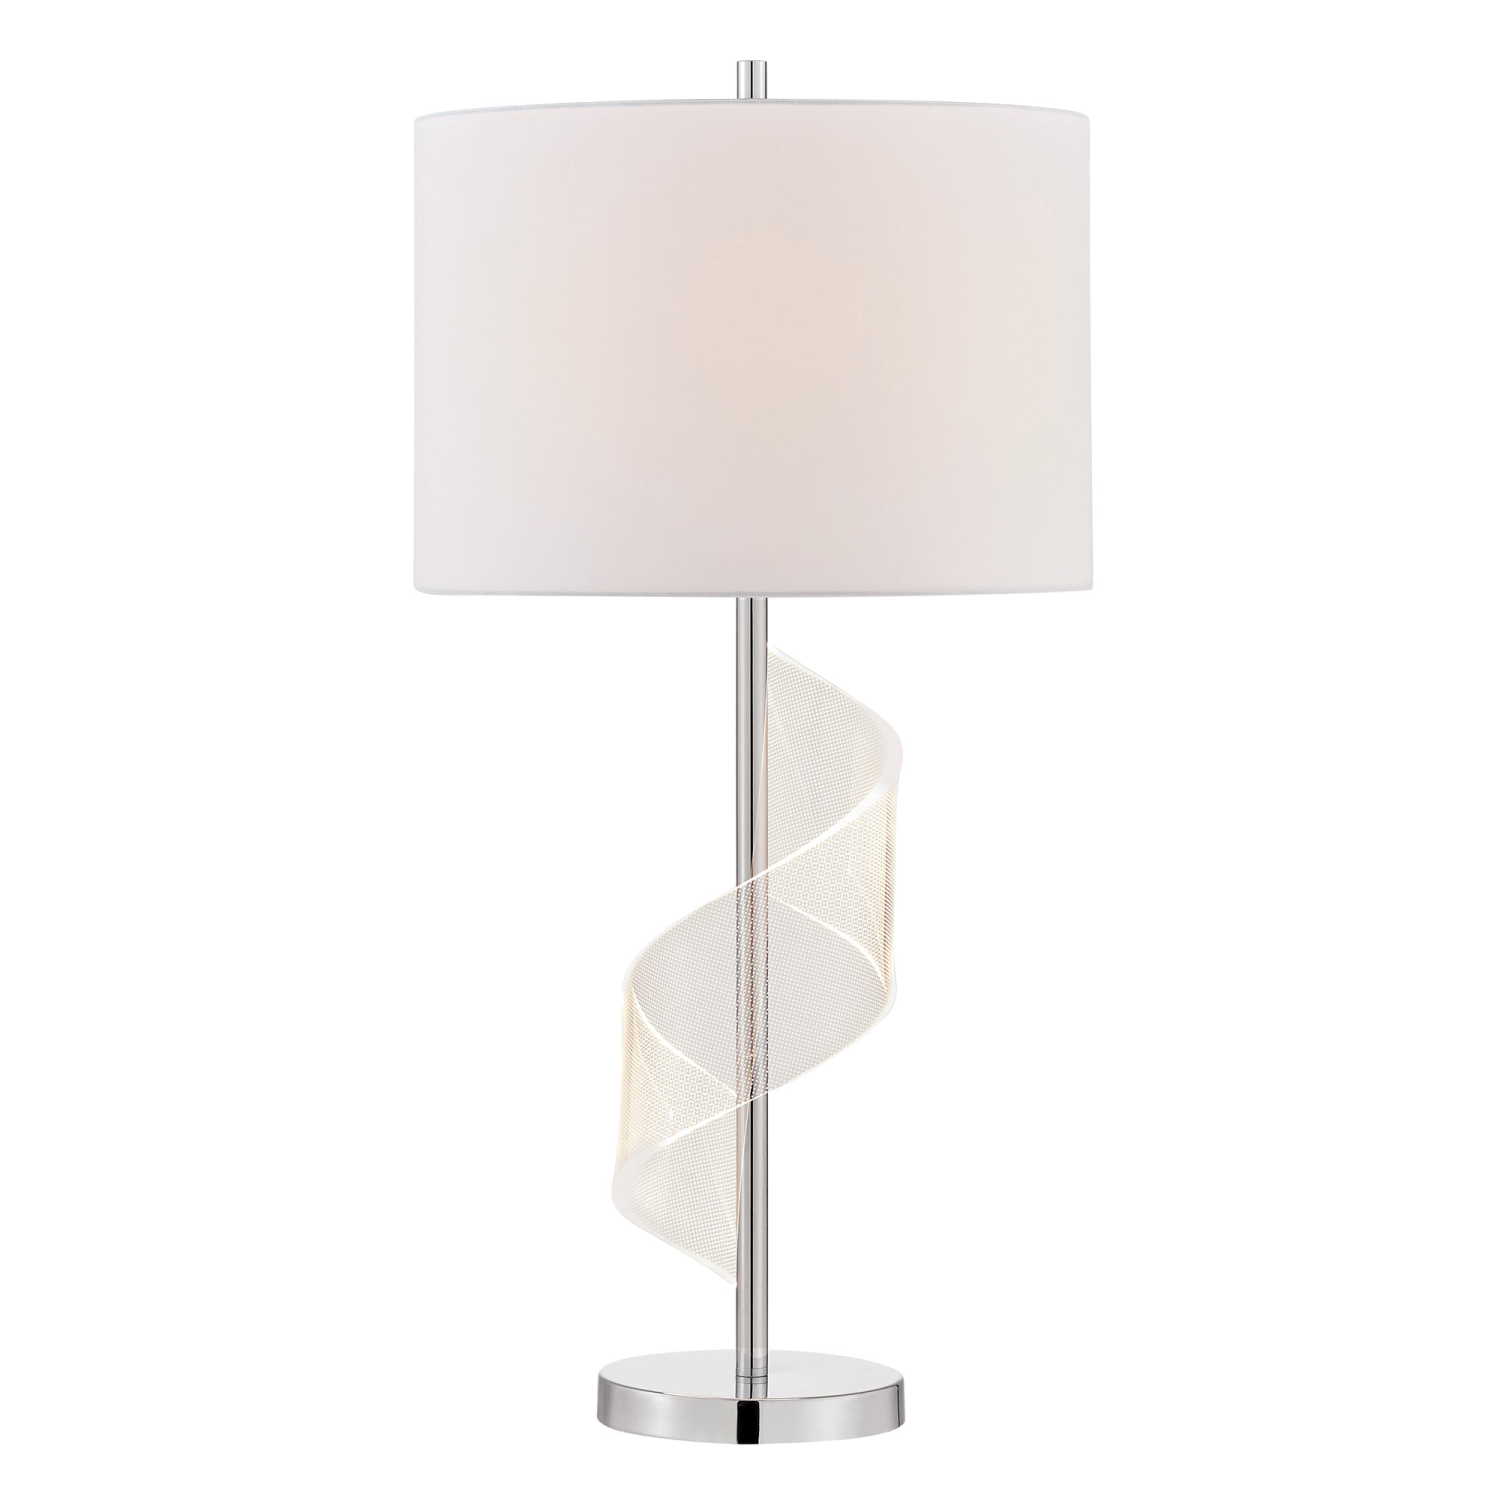 Roetta Table Lamp Picture with White Background